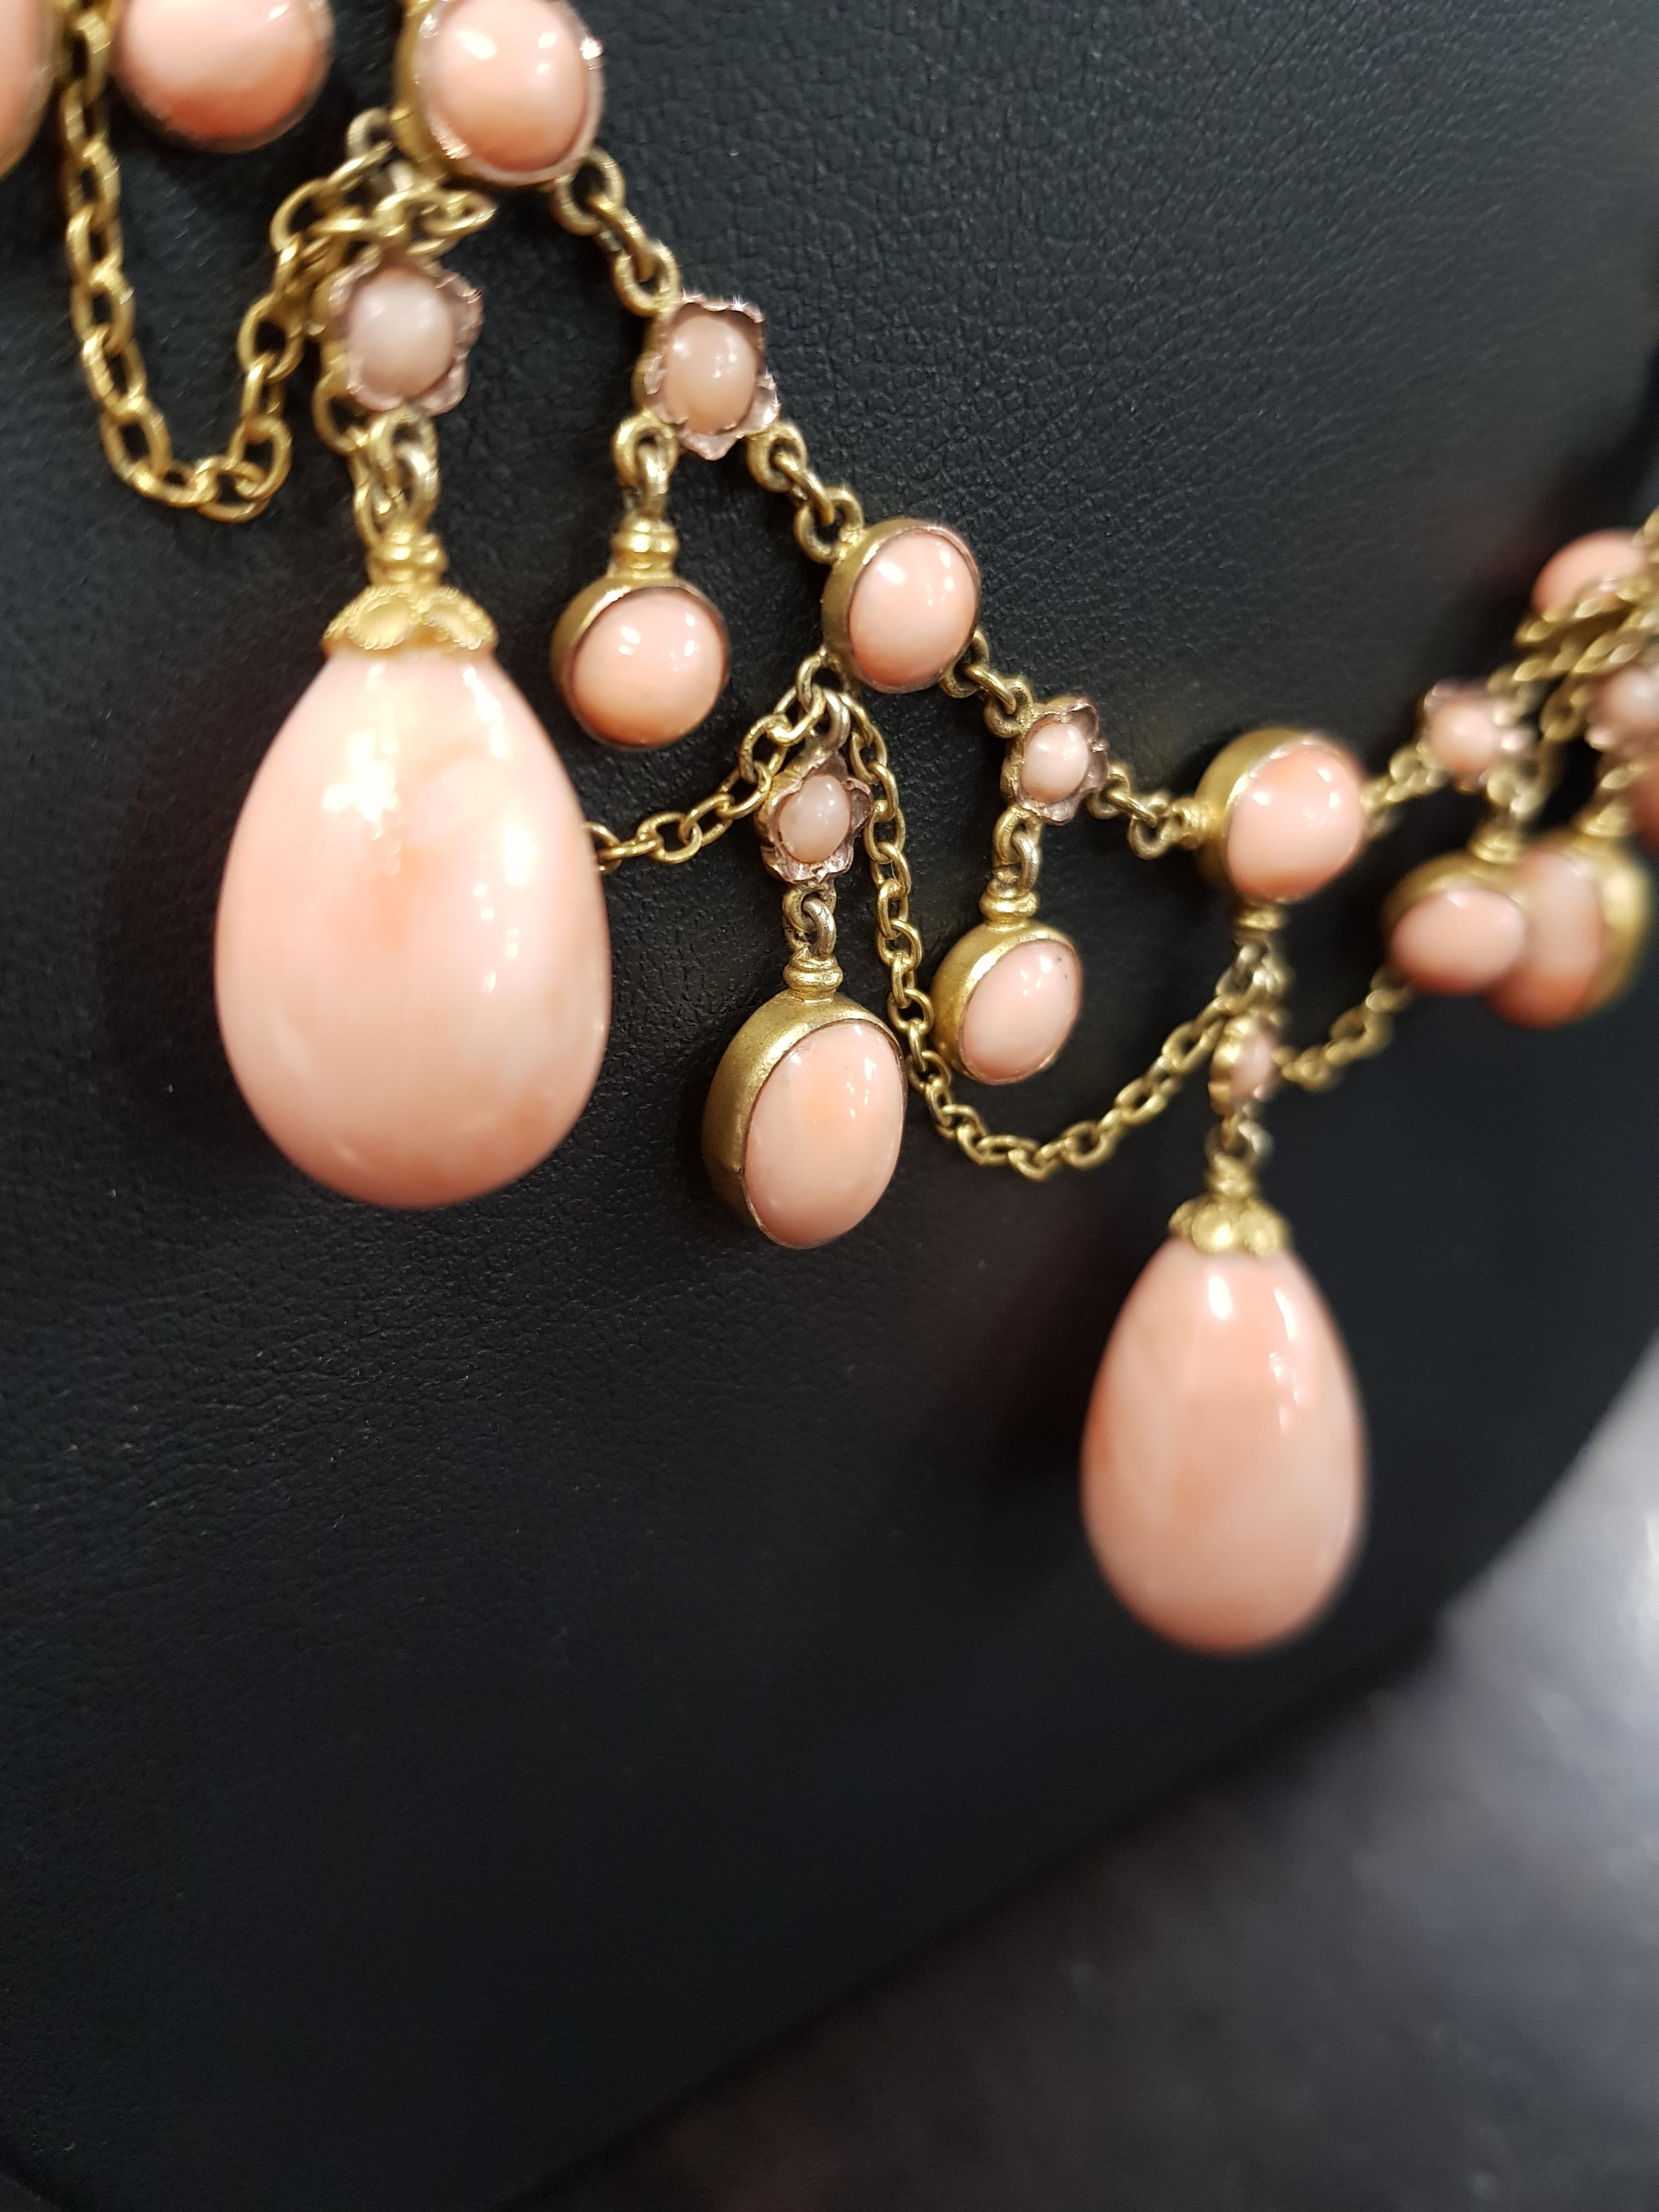 18 CARAT GOLD AND CORAL NECKLACE TOTAL WEIGHT 30.3G - Image 2 of 4